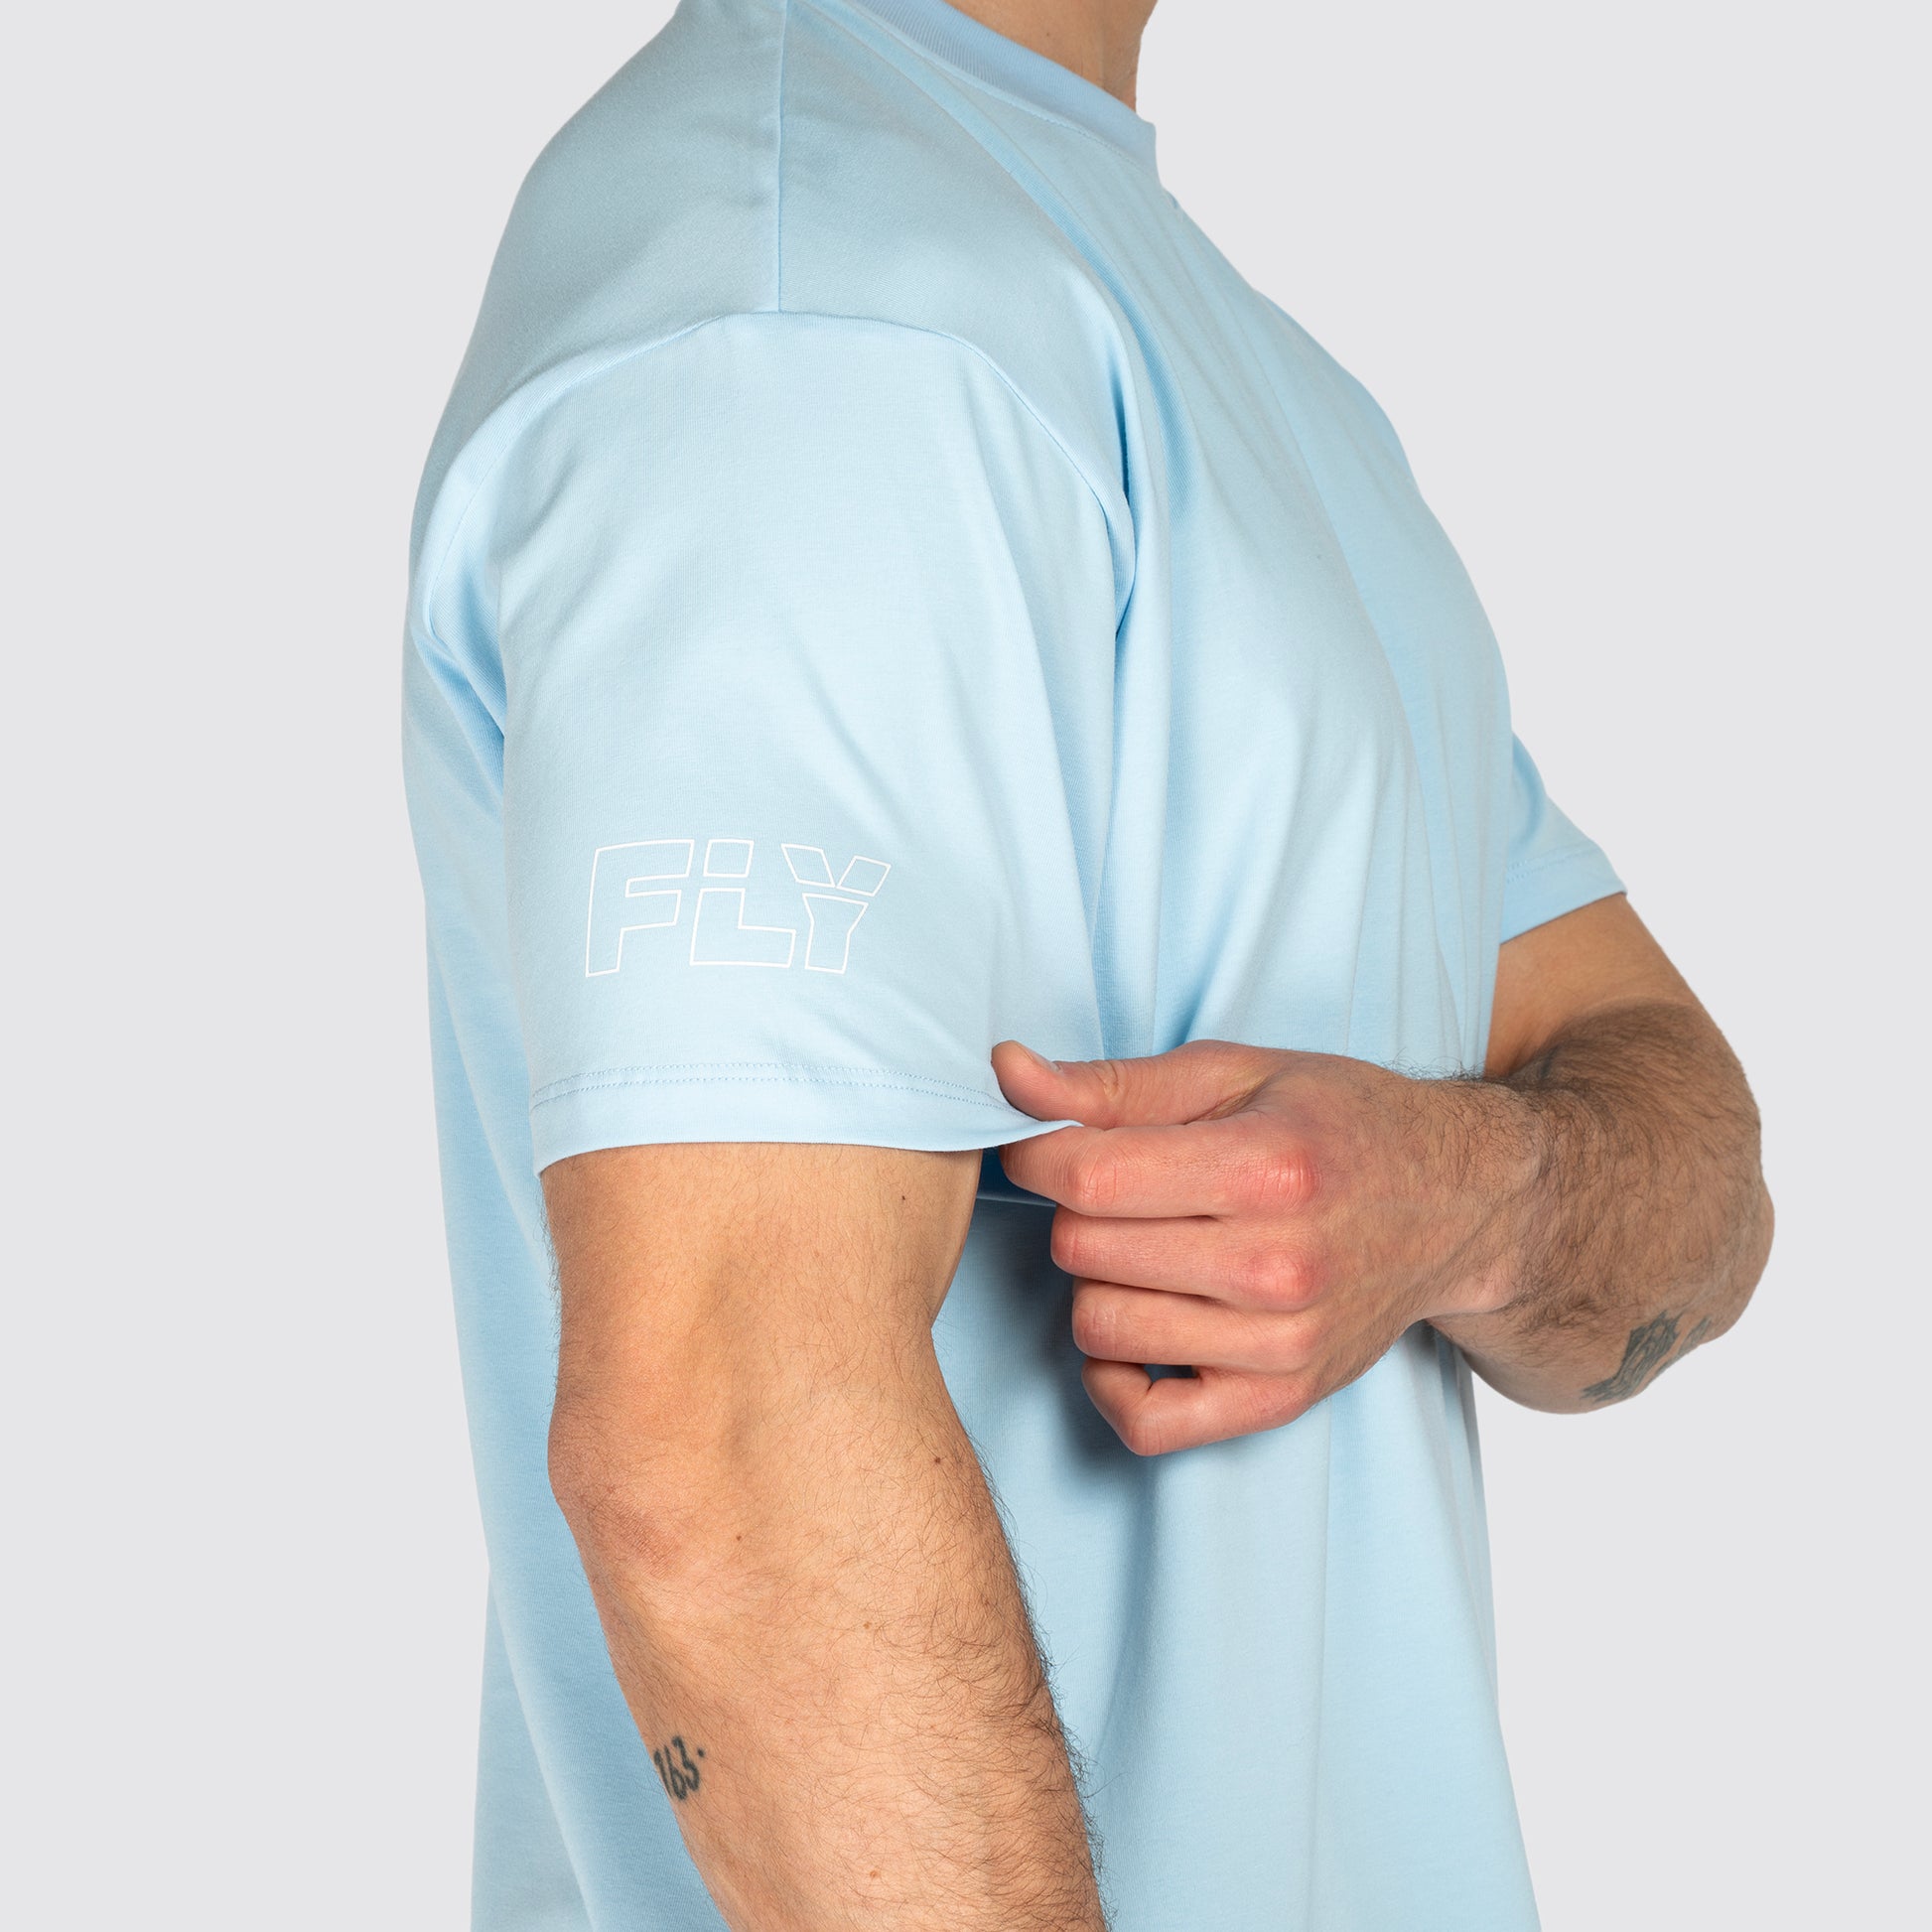 Undisputed Relaxed Fit Tee Aqua (8244019396860)